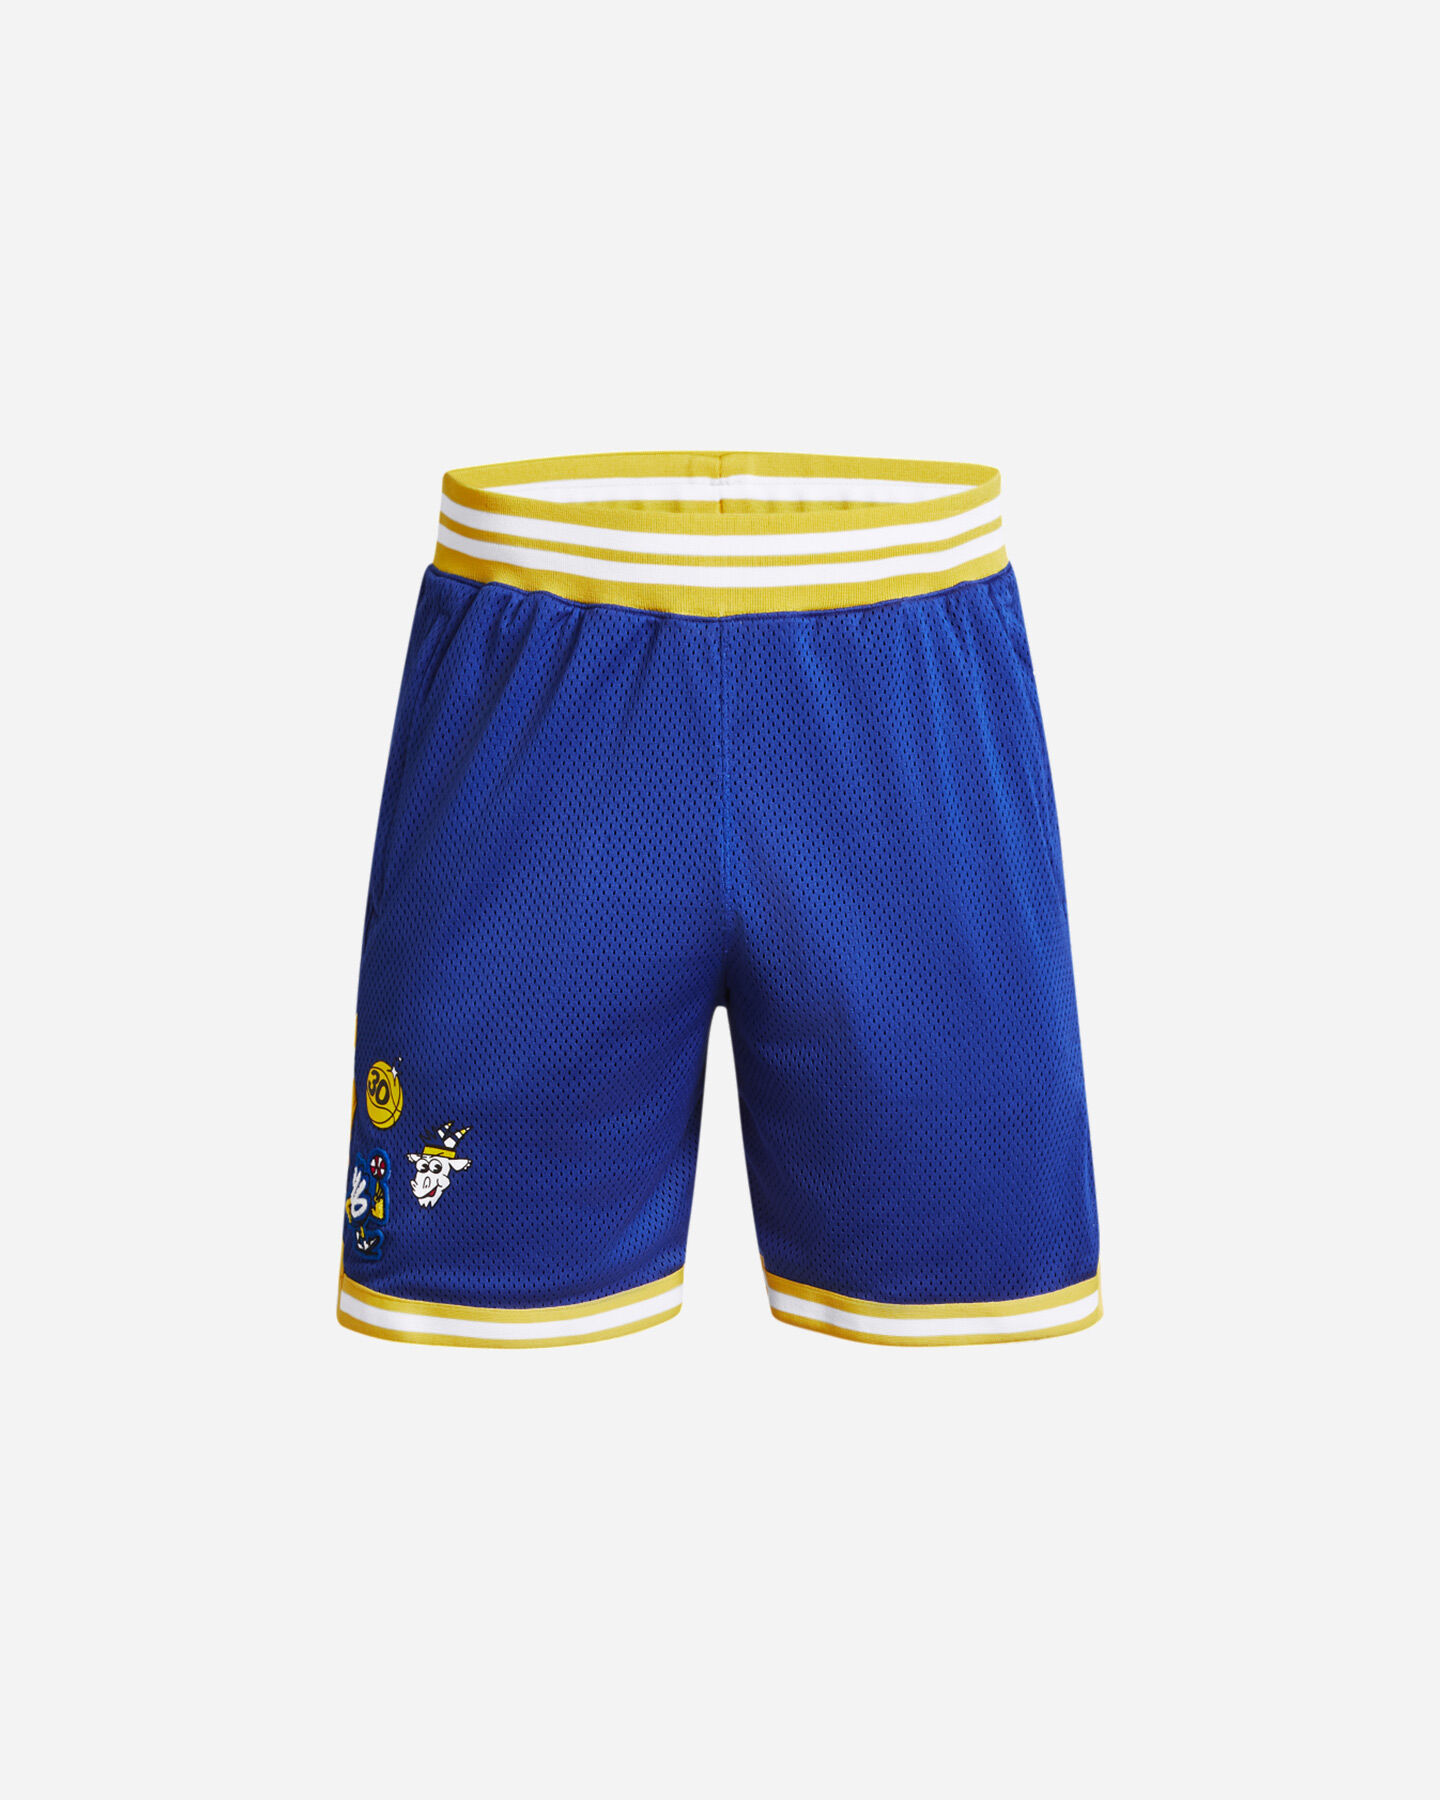  Pantaloncini basket UNDER ARMOUR CURRY MESH 2 M S5579828|0400|MD scatto 0